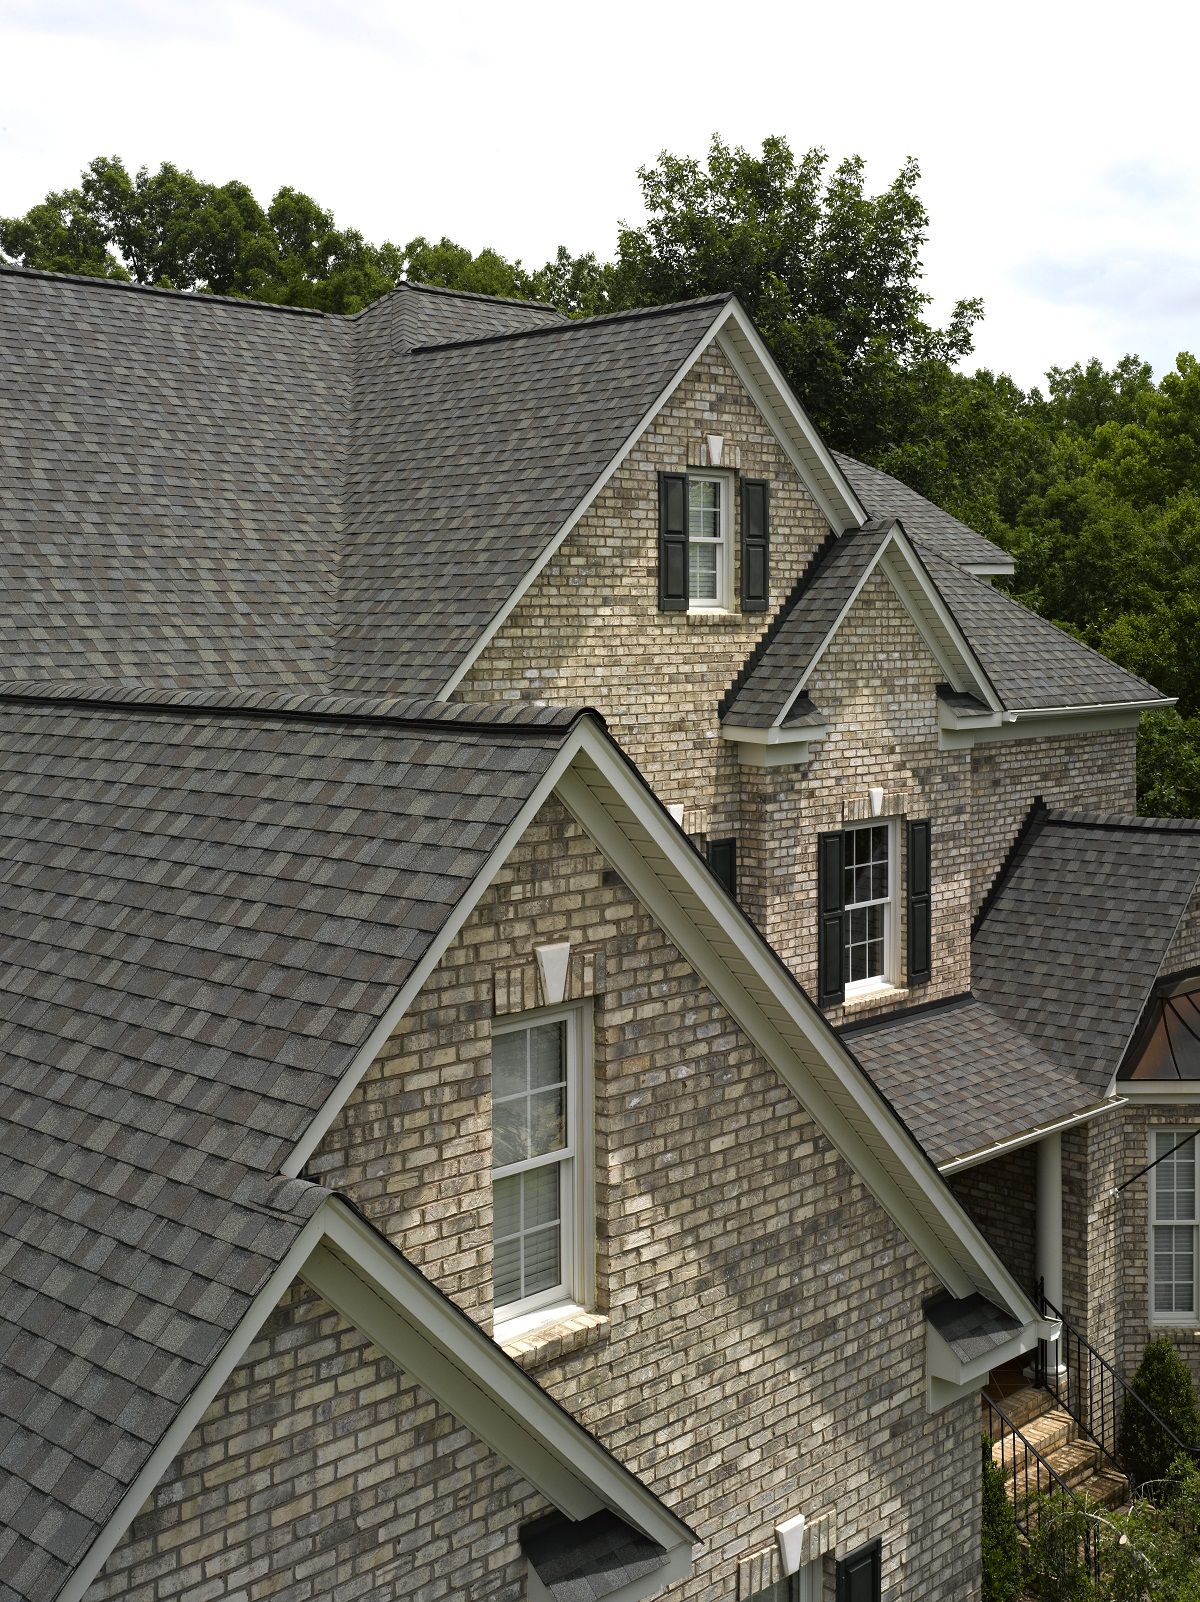 Dempsey Roofing and Contracting - Katy, TX, US, excel roofing